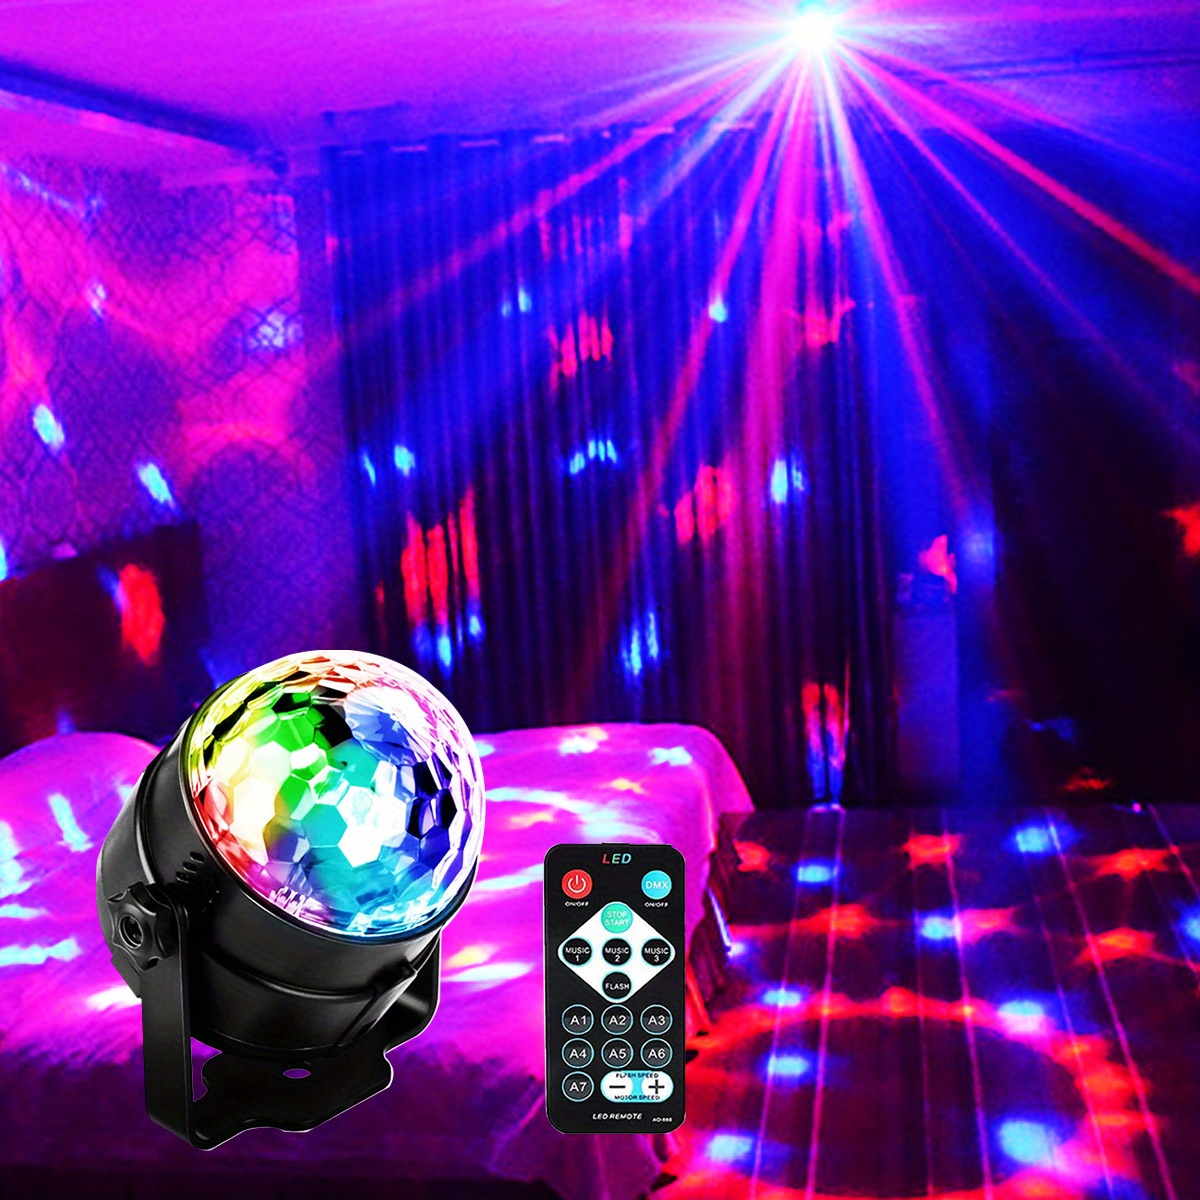 Disco Ball Light Party Lights with Remote Control, Portable Sound Activated  Disco Lights 7 Modes USB Powered RGB Strobe Lamp for Dance Parties